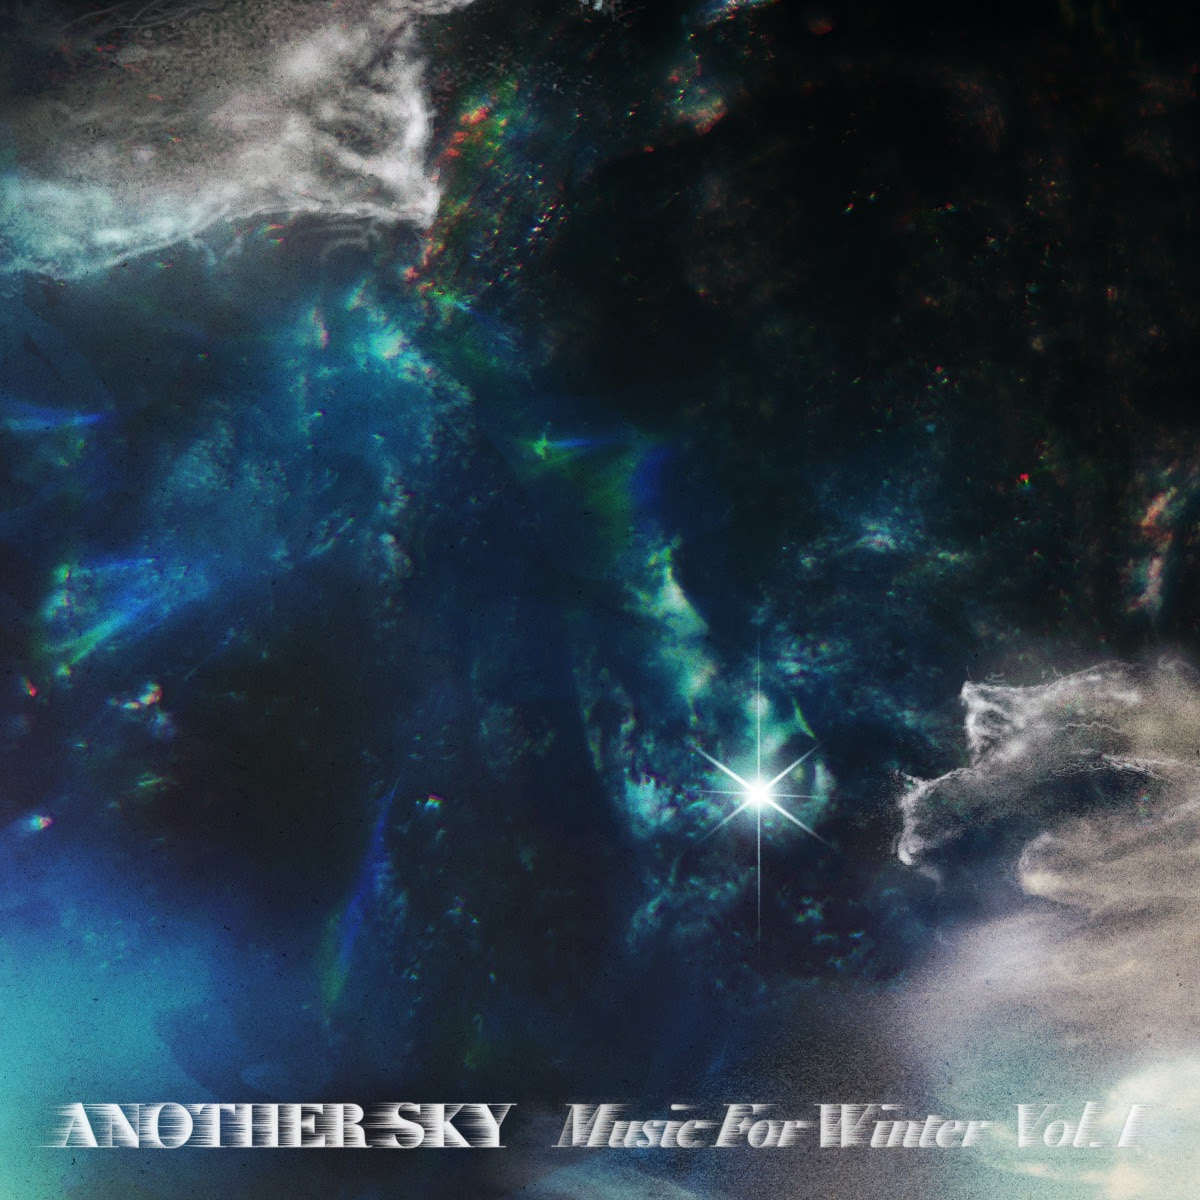 Another Sky - Music For Winter Vol. 1 EP